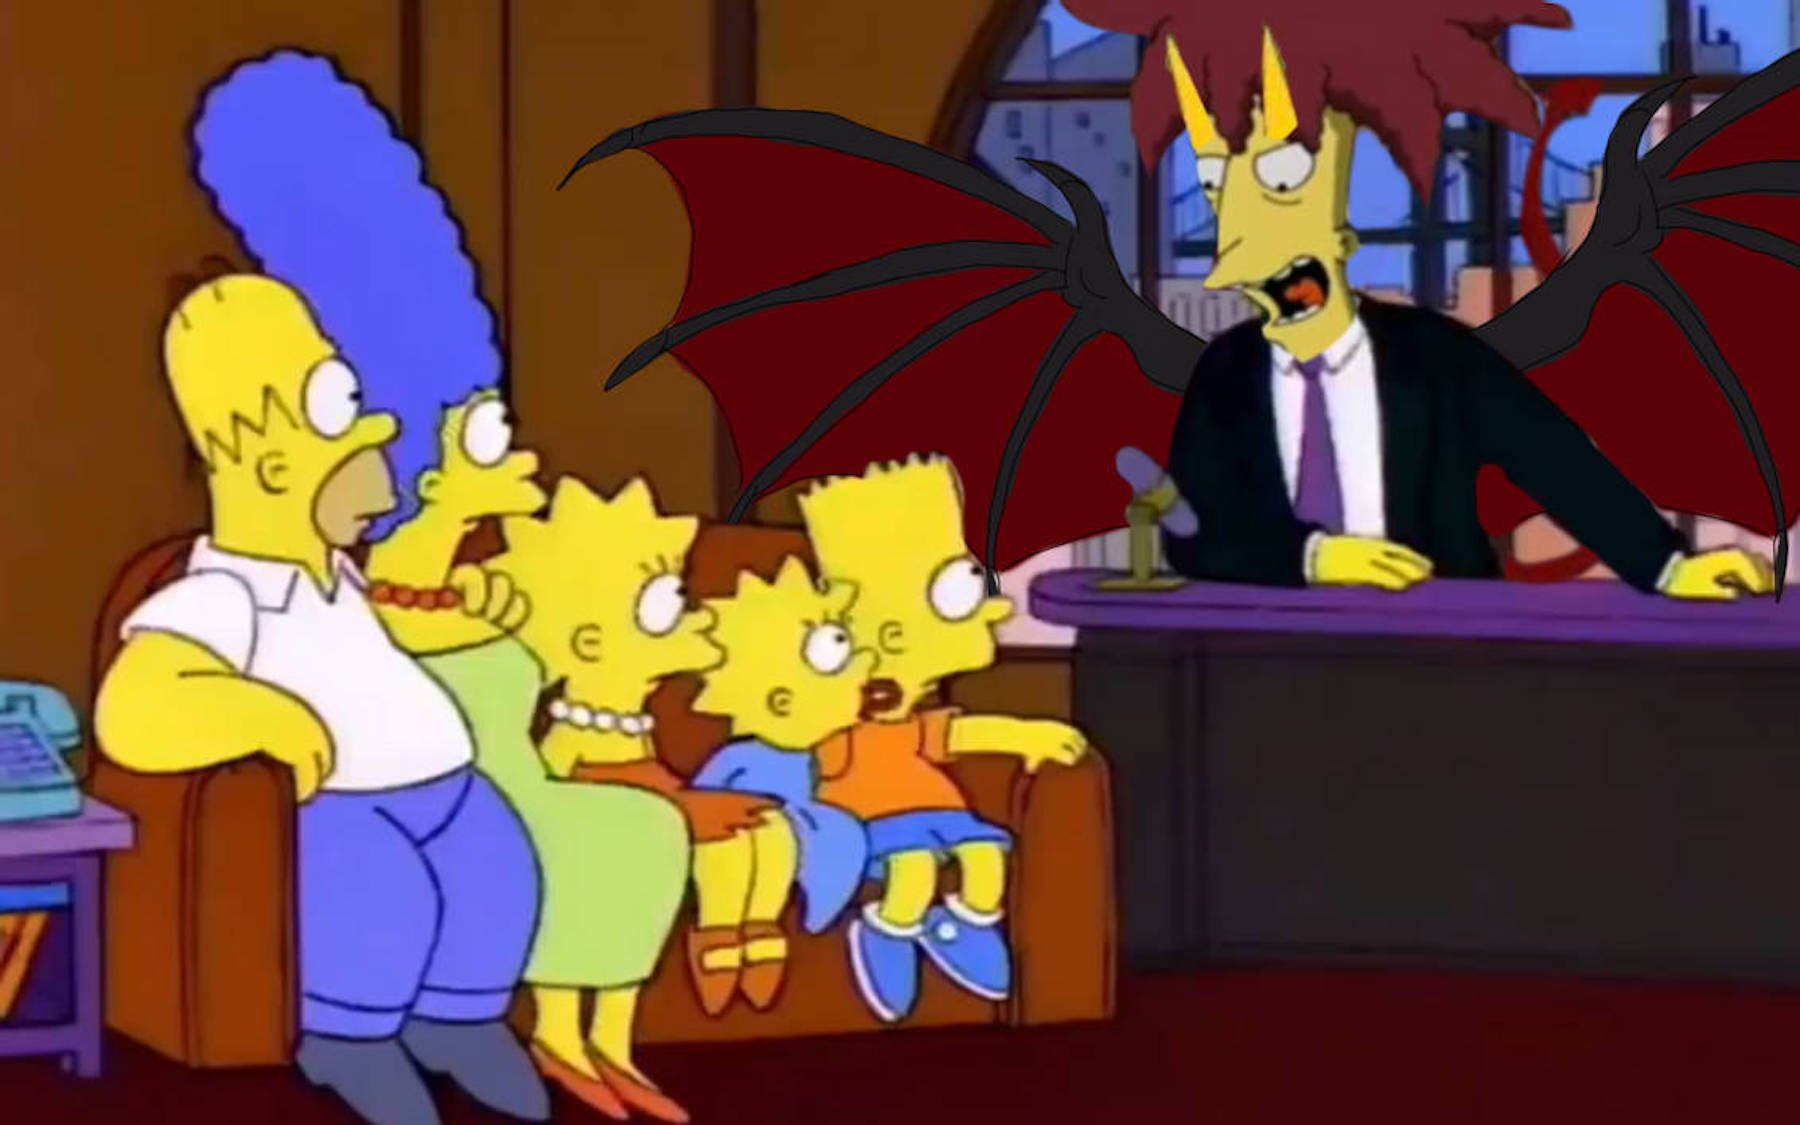 Simpsons couch gag with Sideshow Bob in vampire or demon attire.